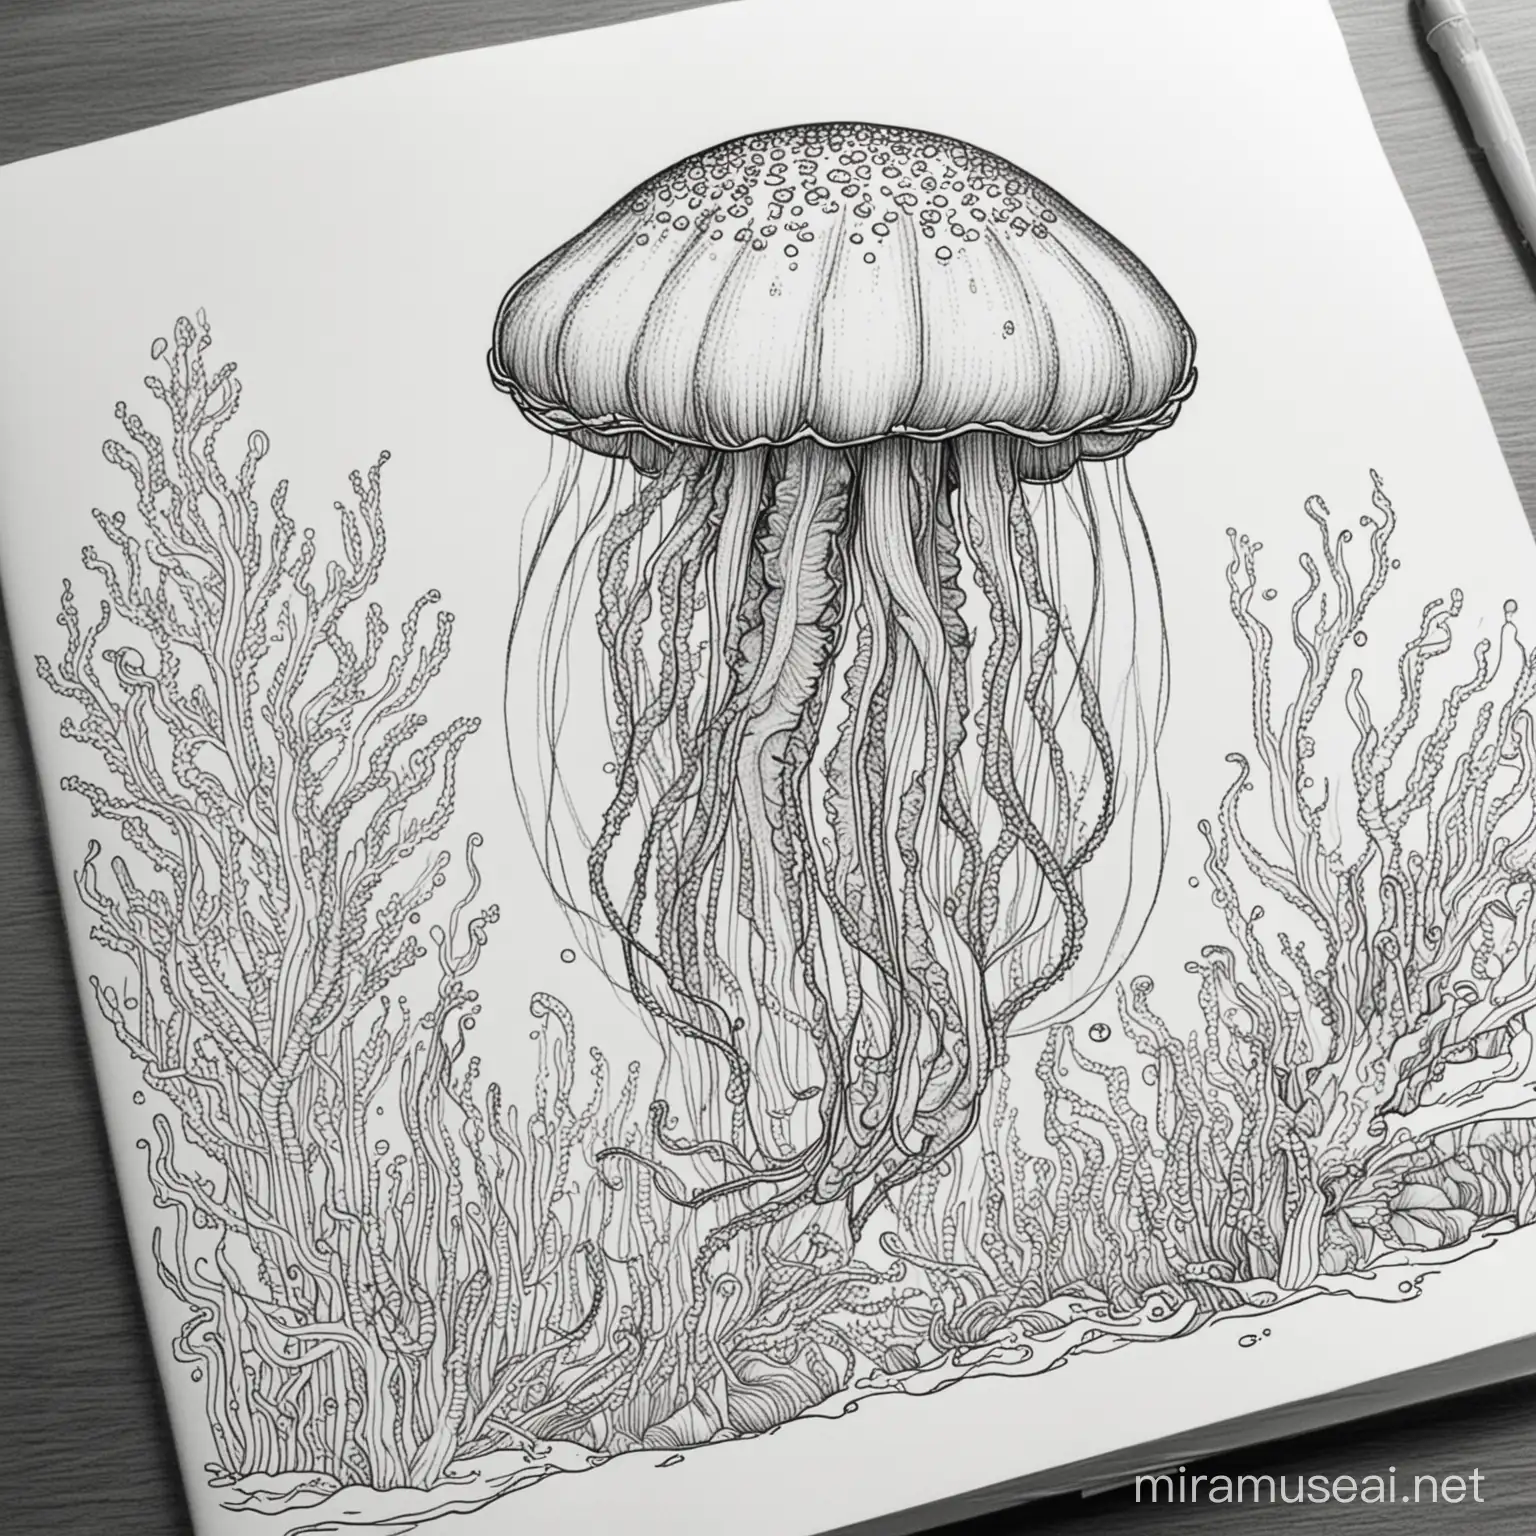 Coloring Book Jellyfish Collection for Relaxing Art Therapy